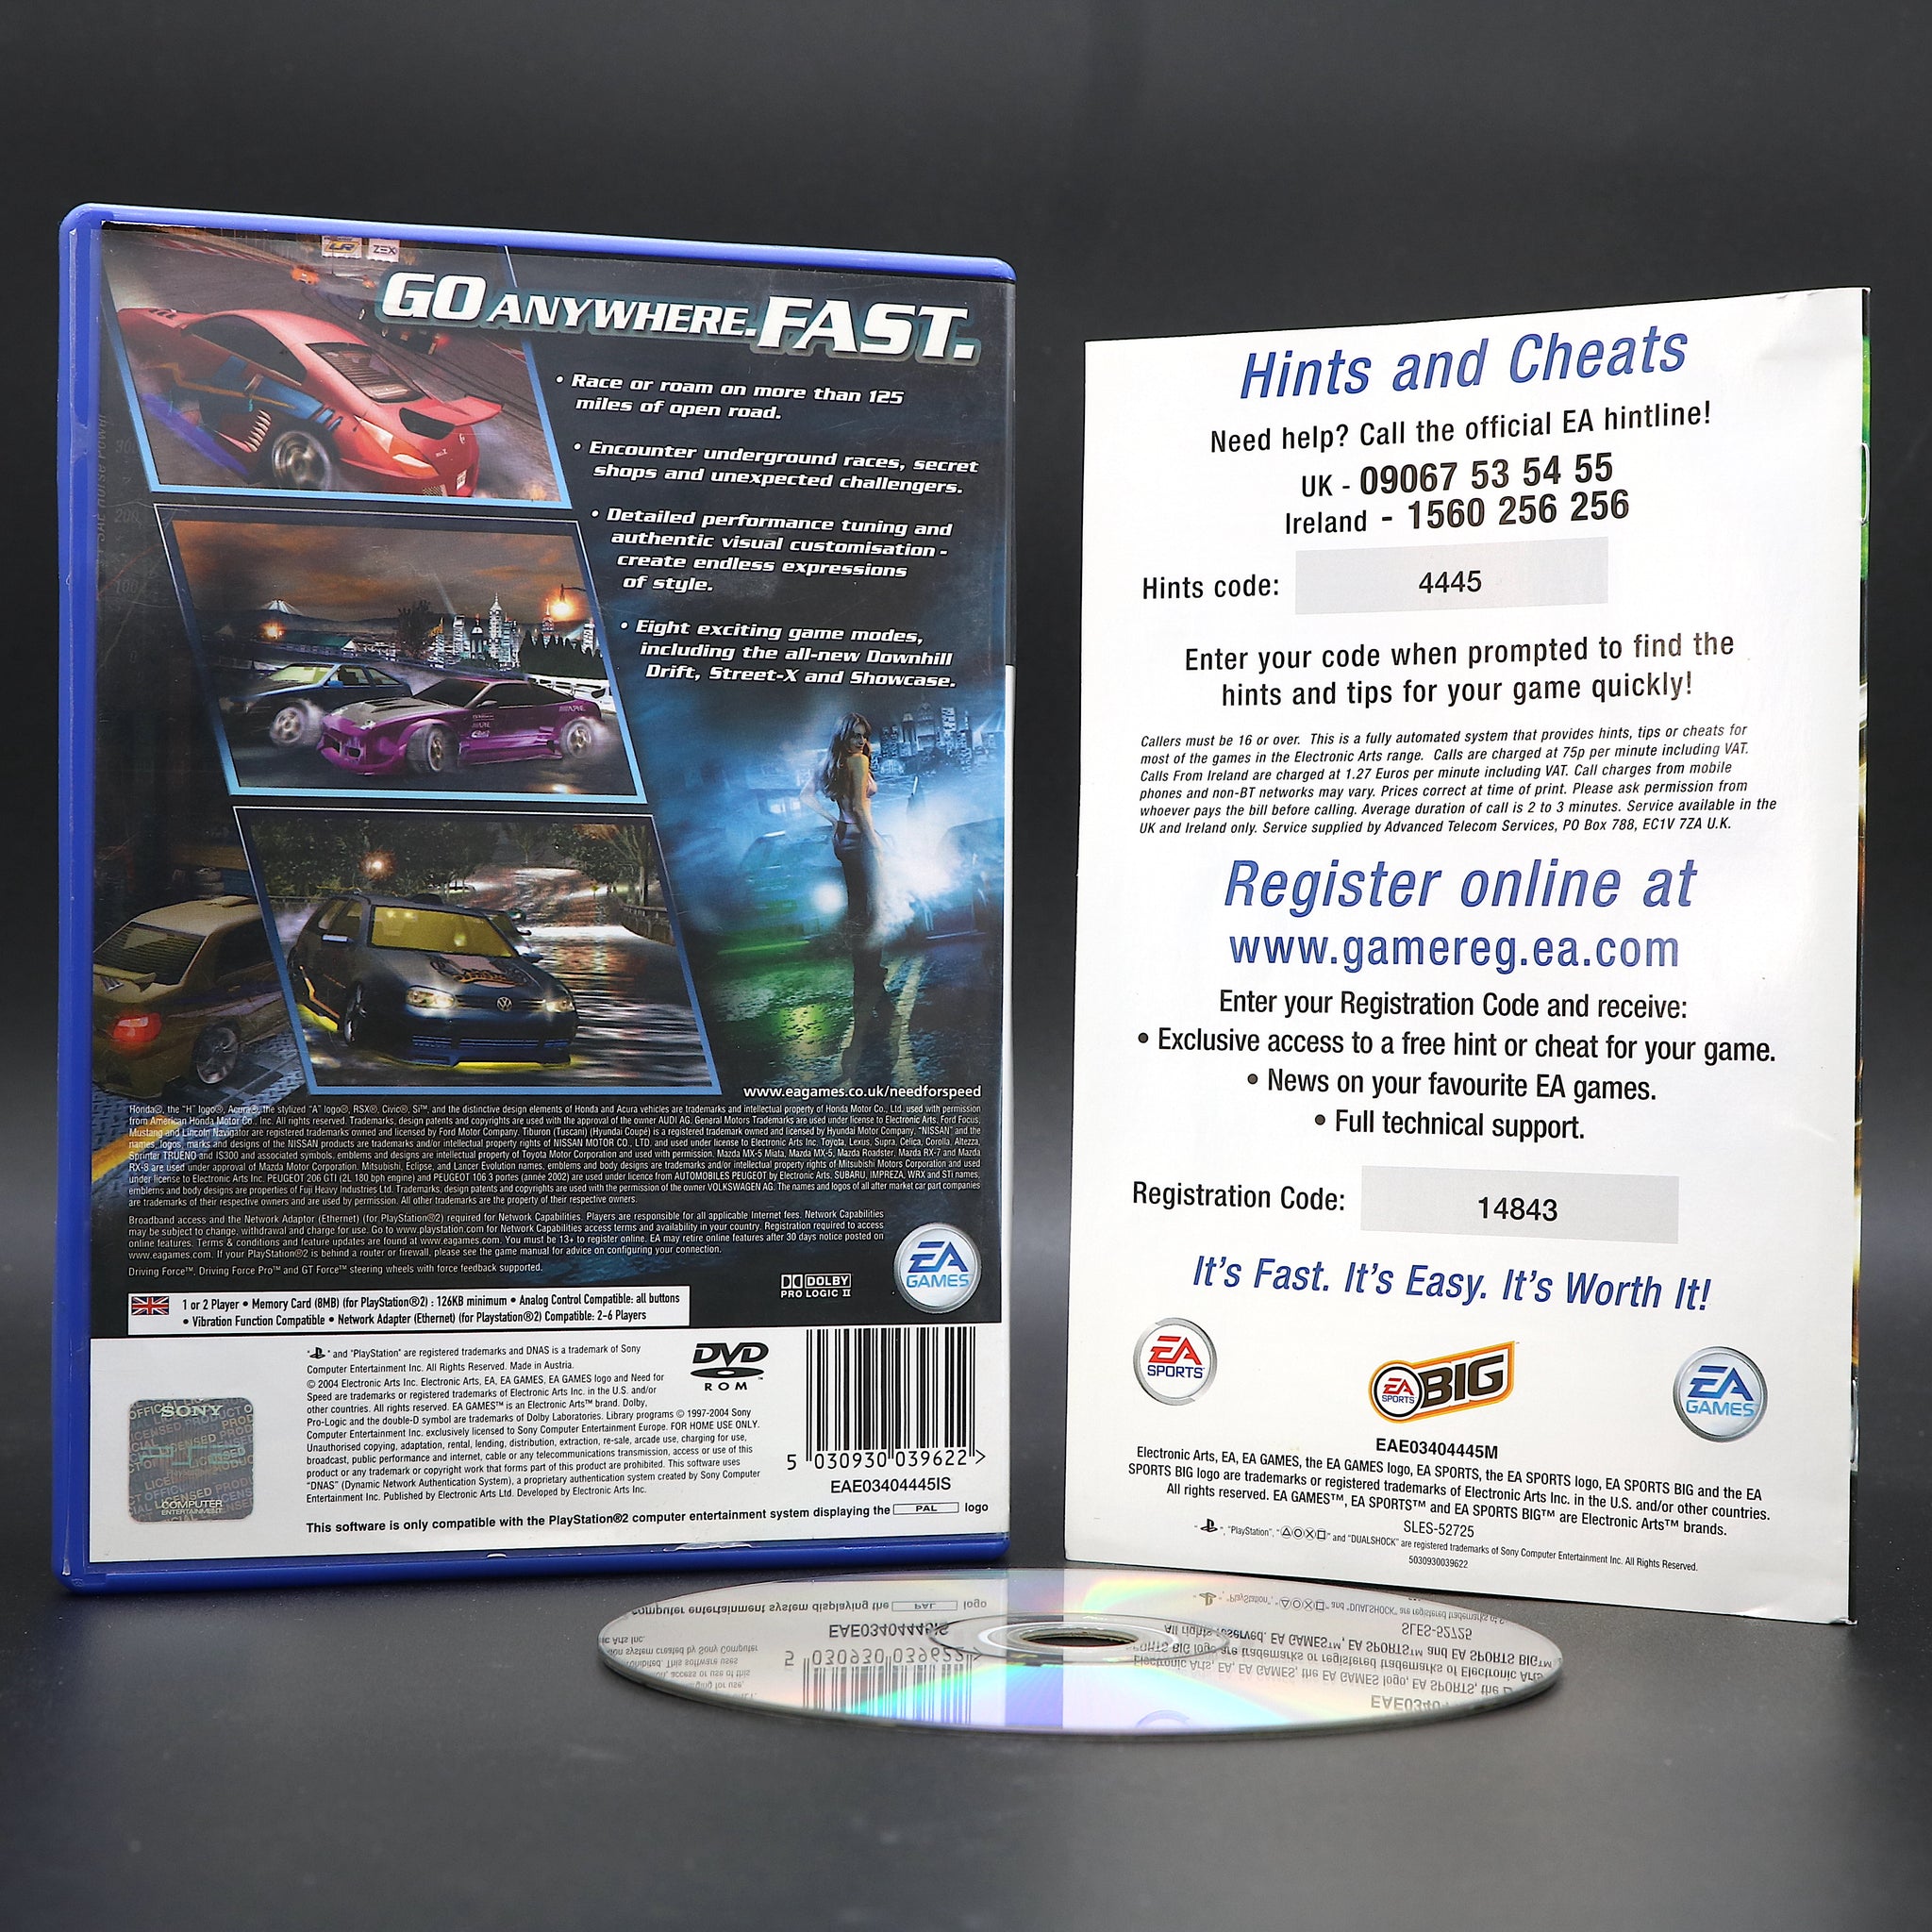 Need For Speed Underground 2 | PSTWO PS2 Game | Collectable Condition!